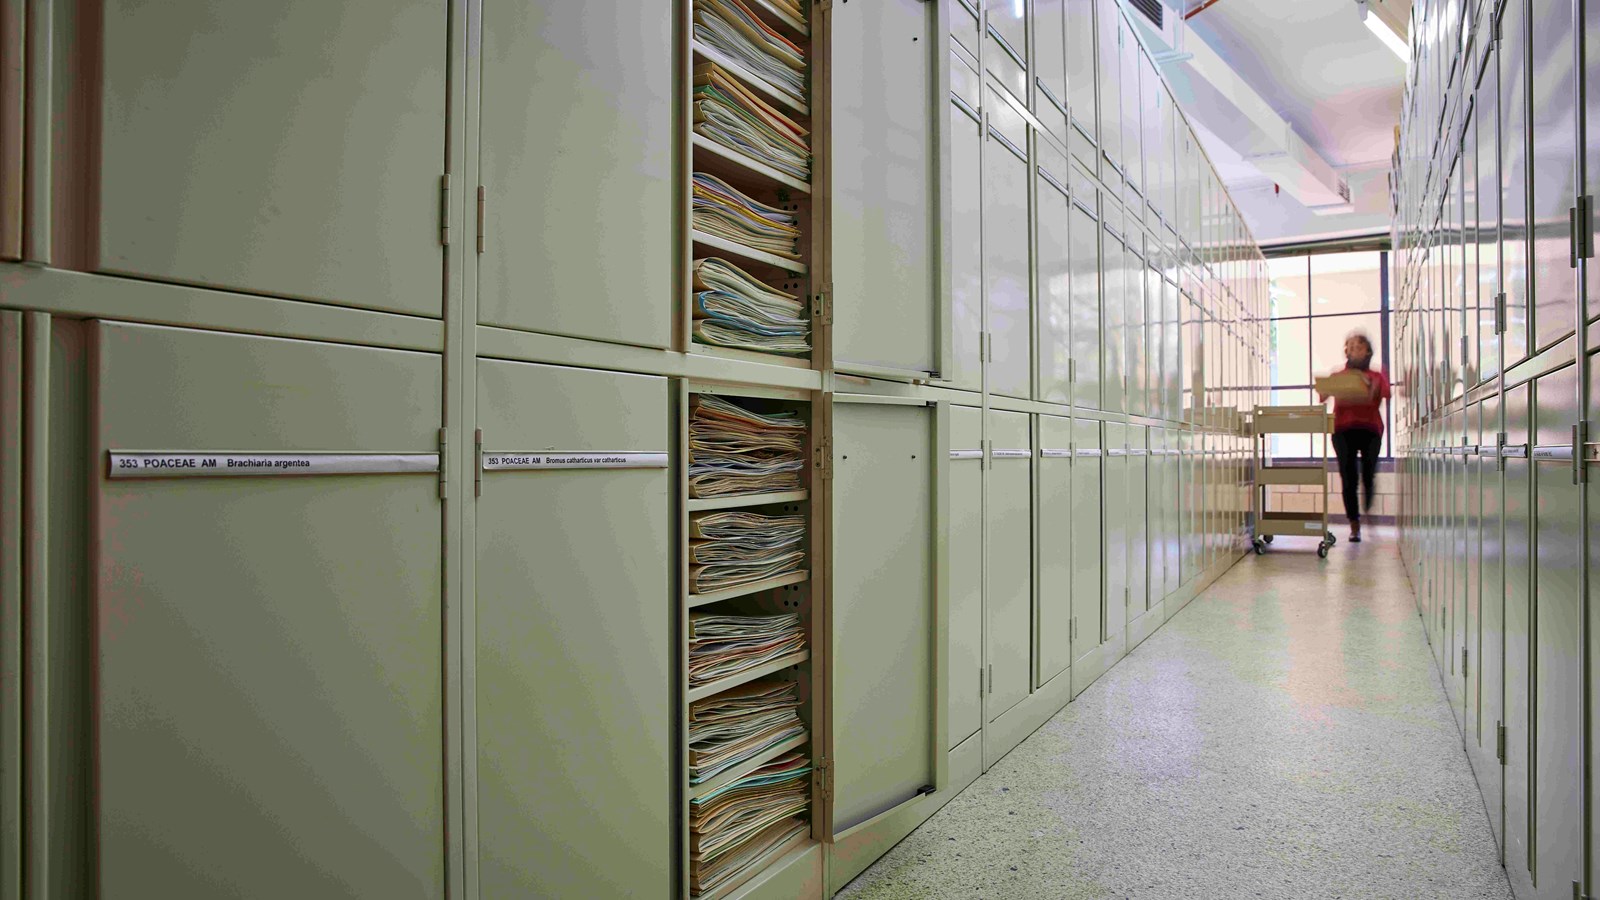 Two rows of metal cream-coloured metal cupboards, with thin paper labels on each door. The doors of two cabinets are open, with paper folders showing inside. At the far end of the aisle, a blurry person carrying a pile of folders approaches a trolley.